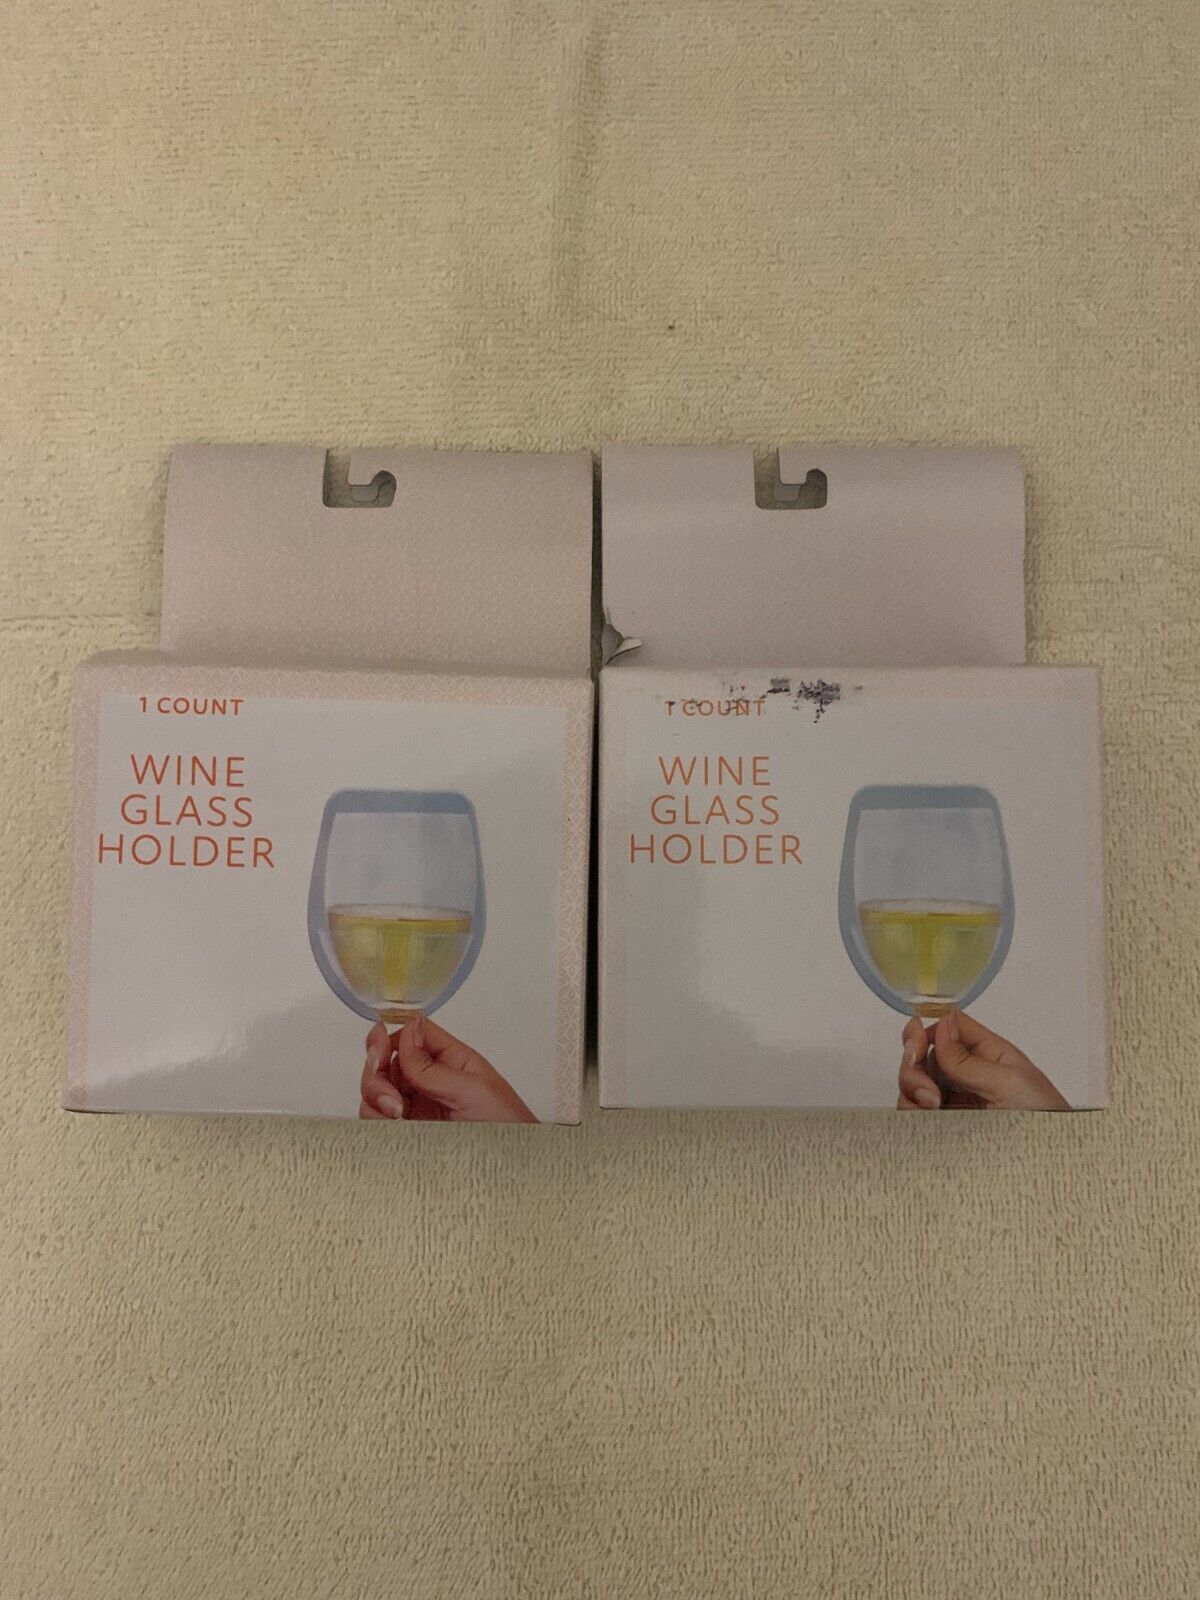 Lot Of 2 Wine Glass Holders Anyko For Bath or Shower Brand New Ankyo Developement 2 WINE GLASS HOLDER